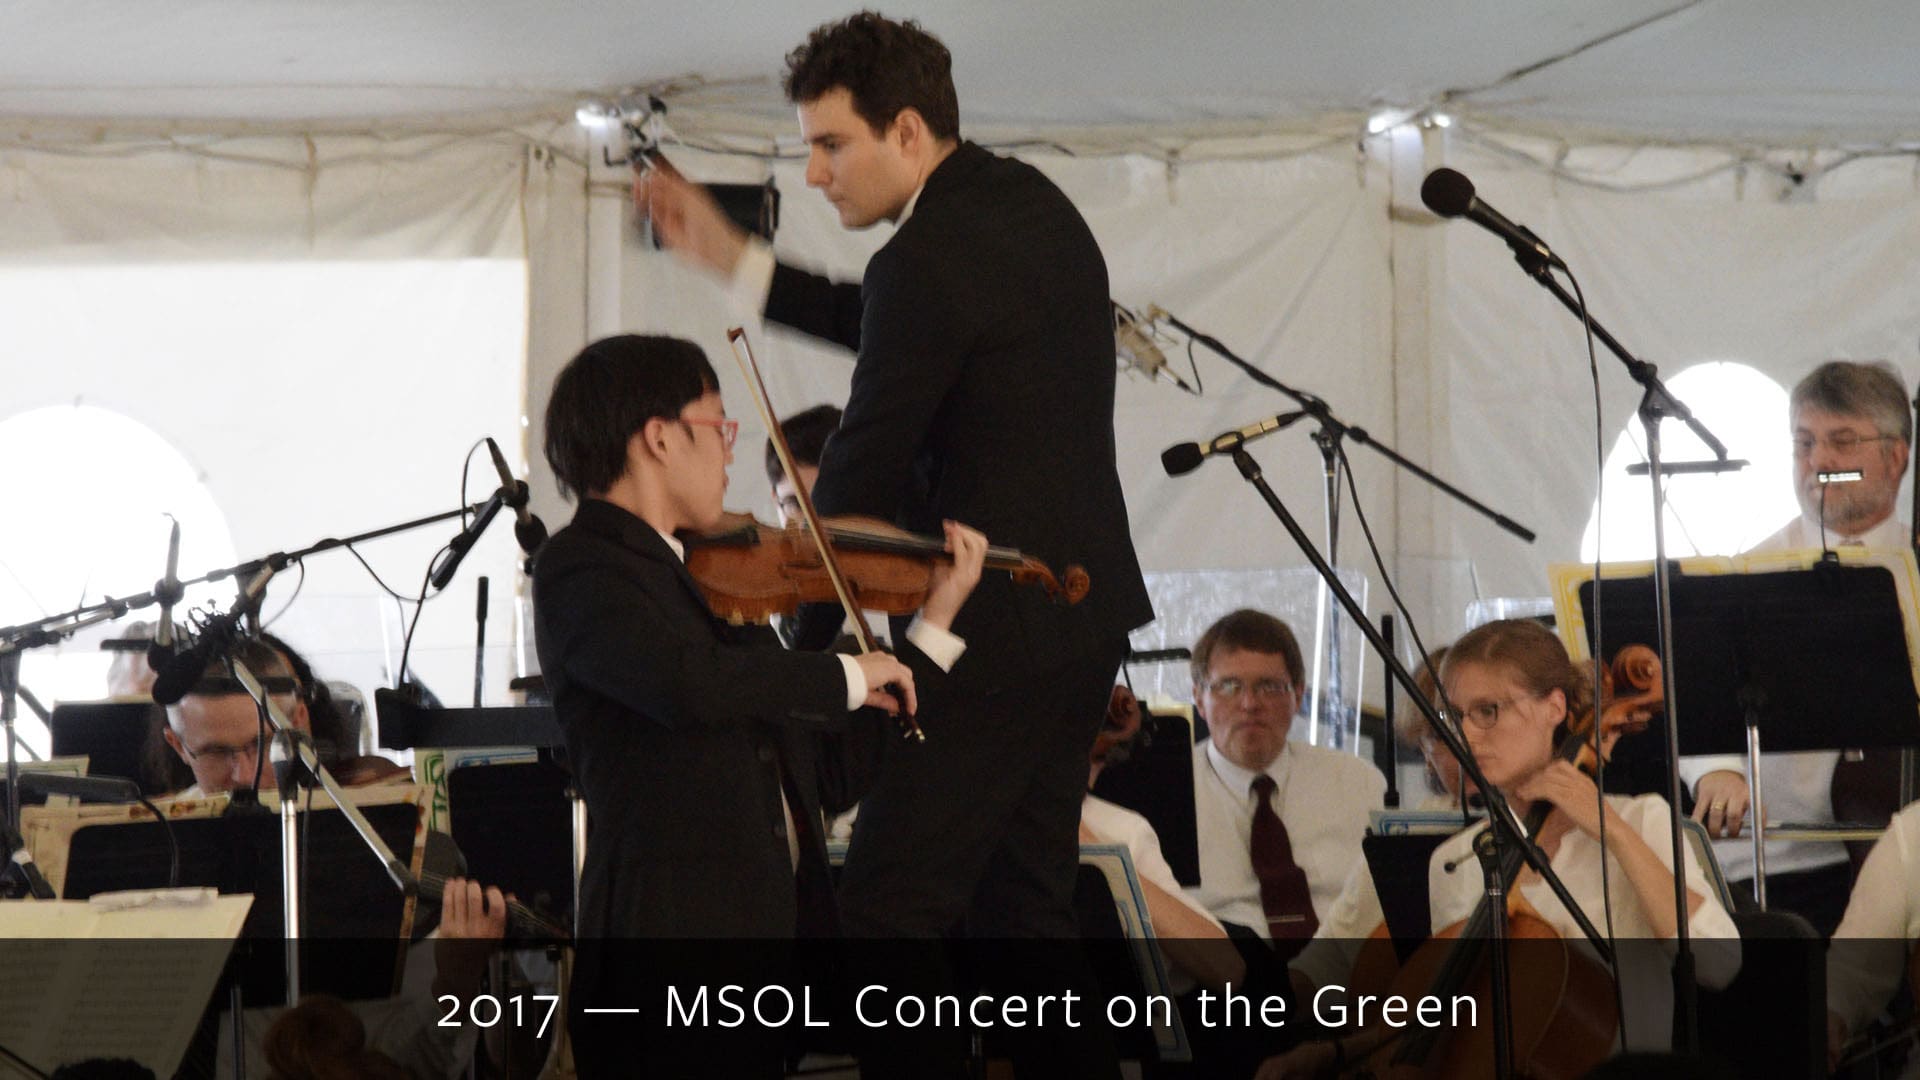 MSOL Concert on the Green